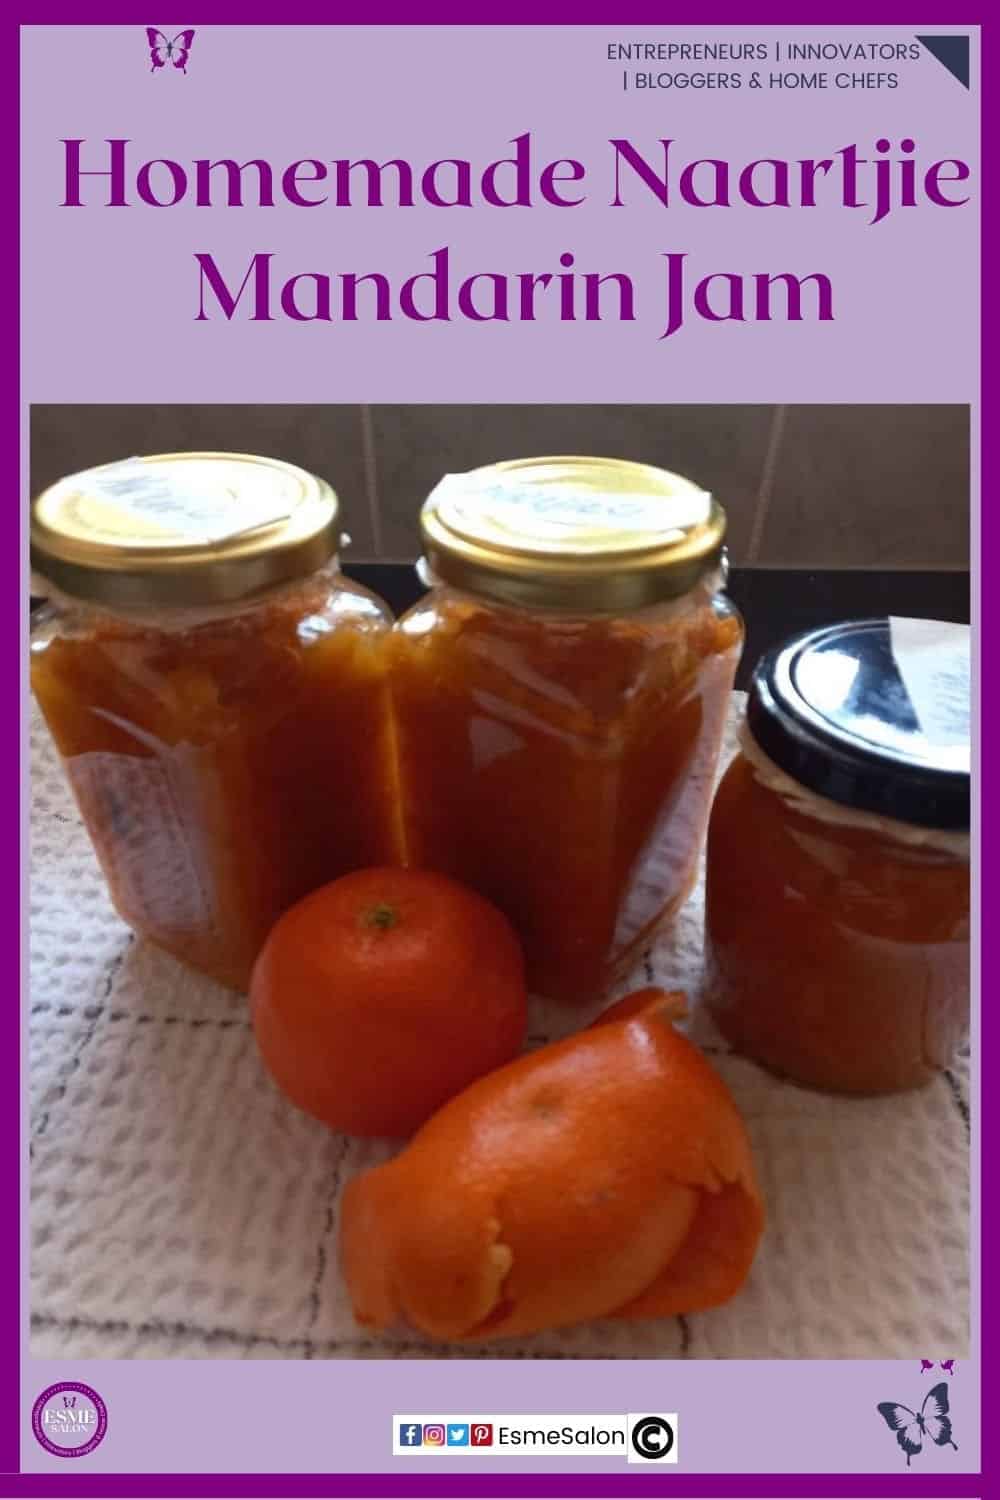 an image of three glass jars with lids filled with Homemade Naartjie Mandarin Jam as well as a madarin and some mandarin peels in front of the bottles